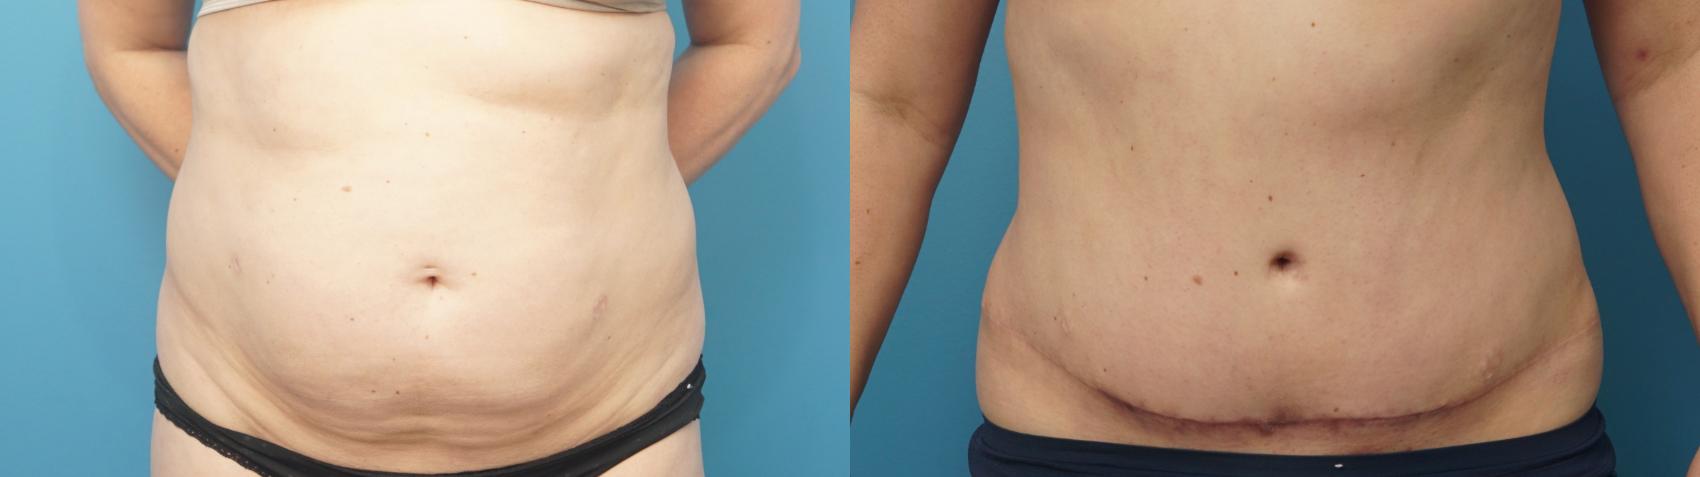 Before & After Abdominoplasty/Tummy Tuck Case 400 Front View in Northbrook, IL